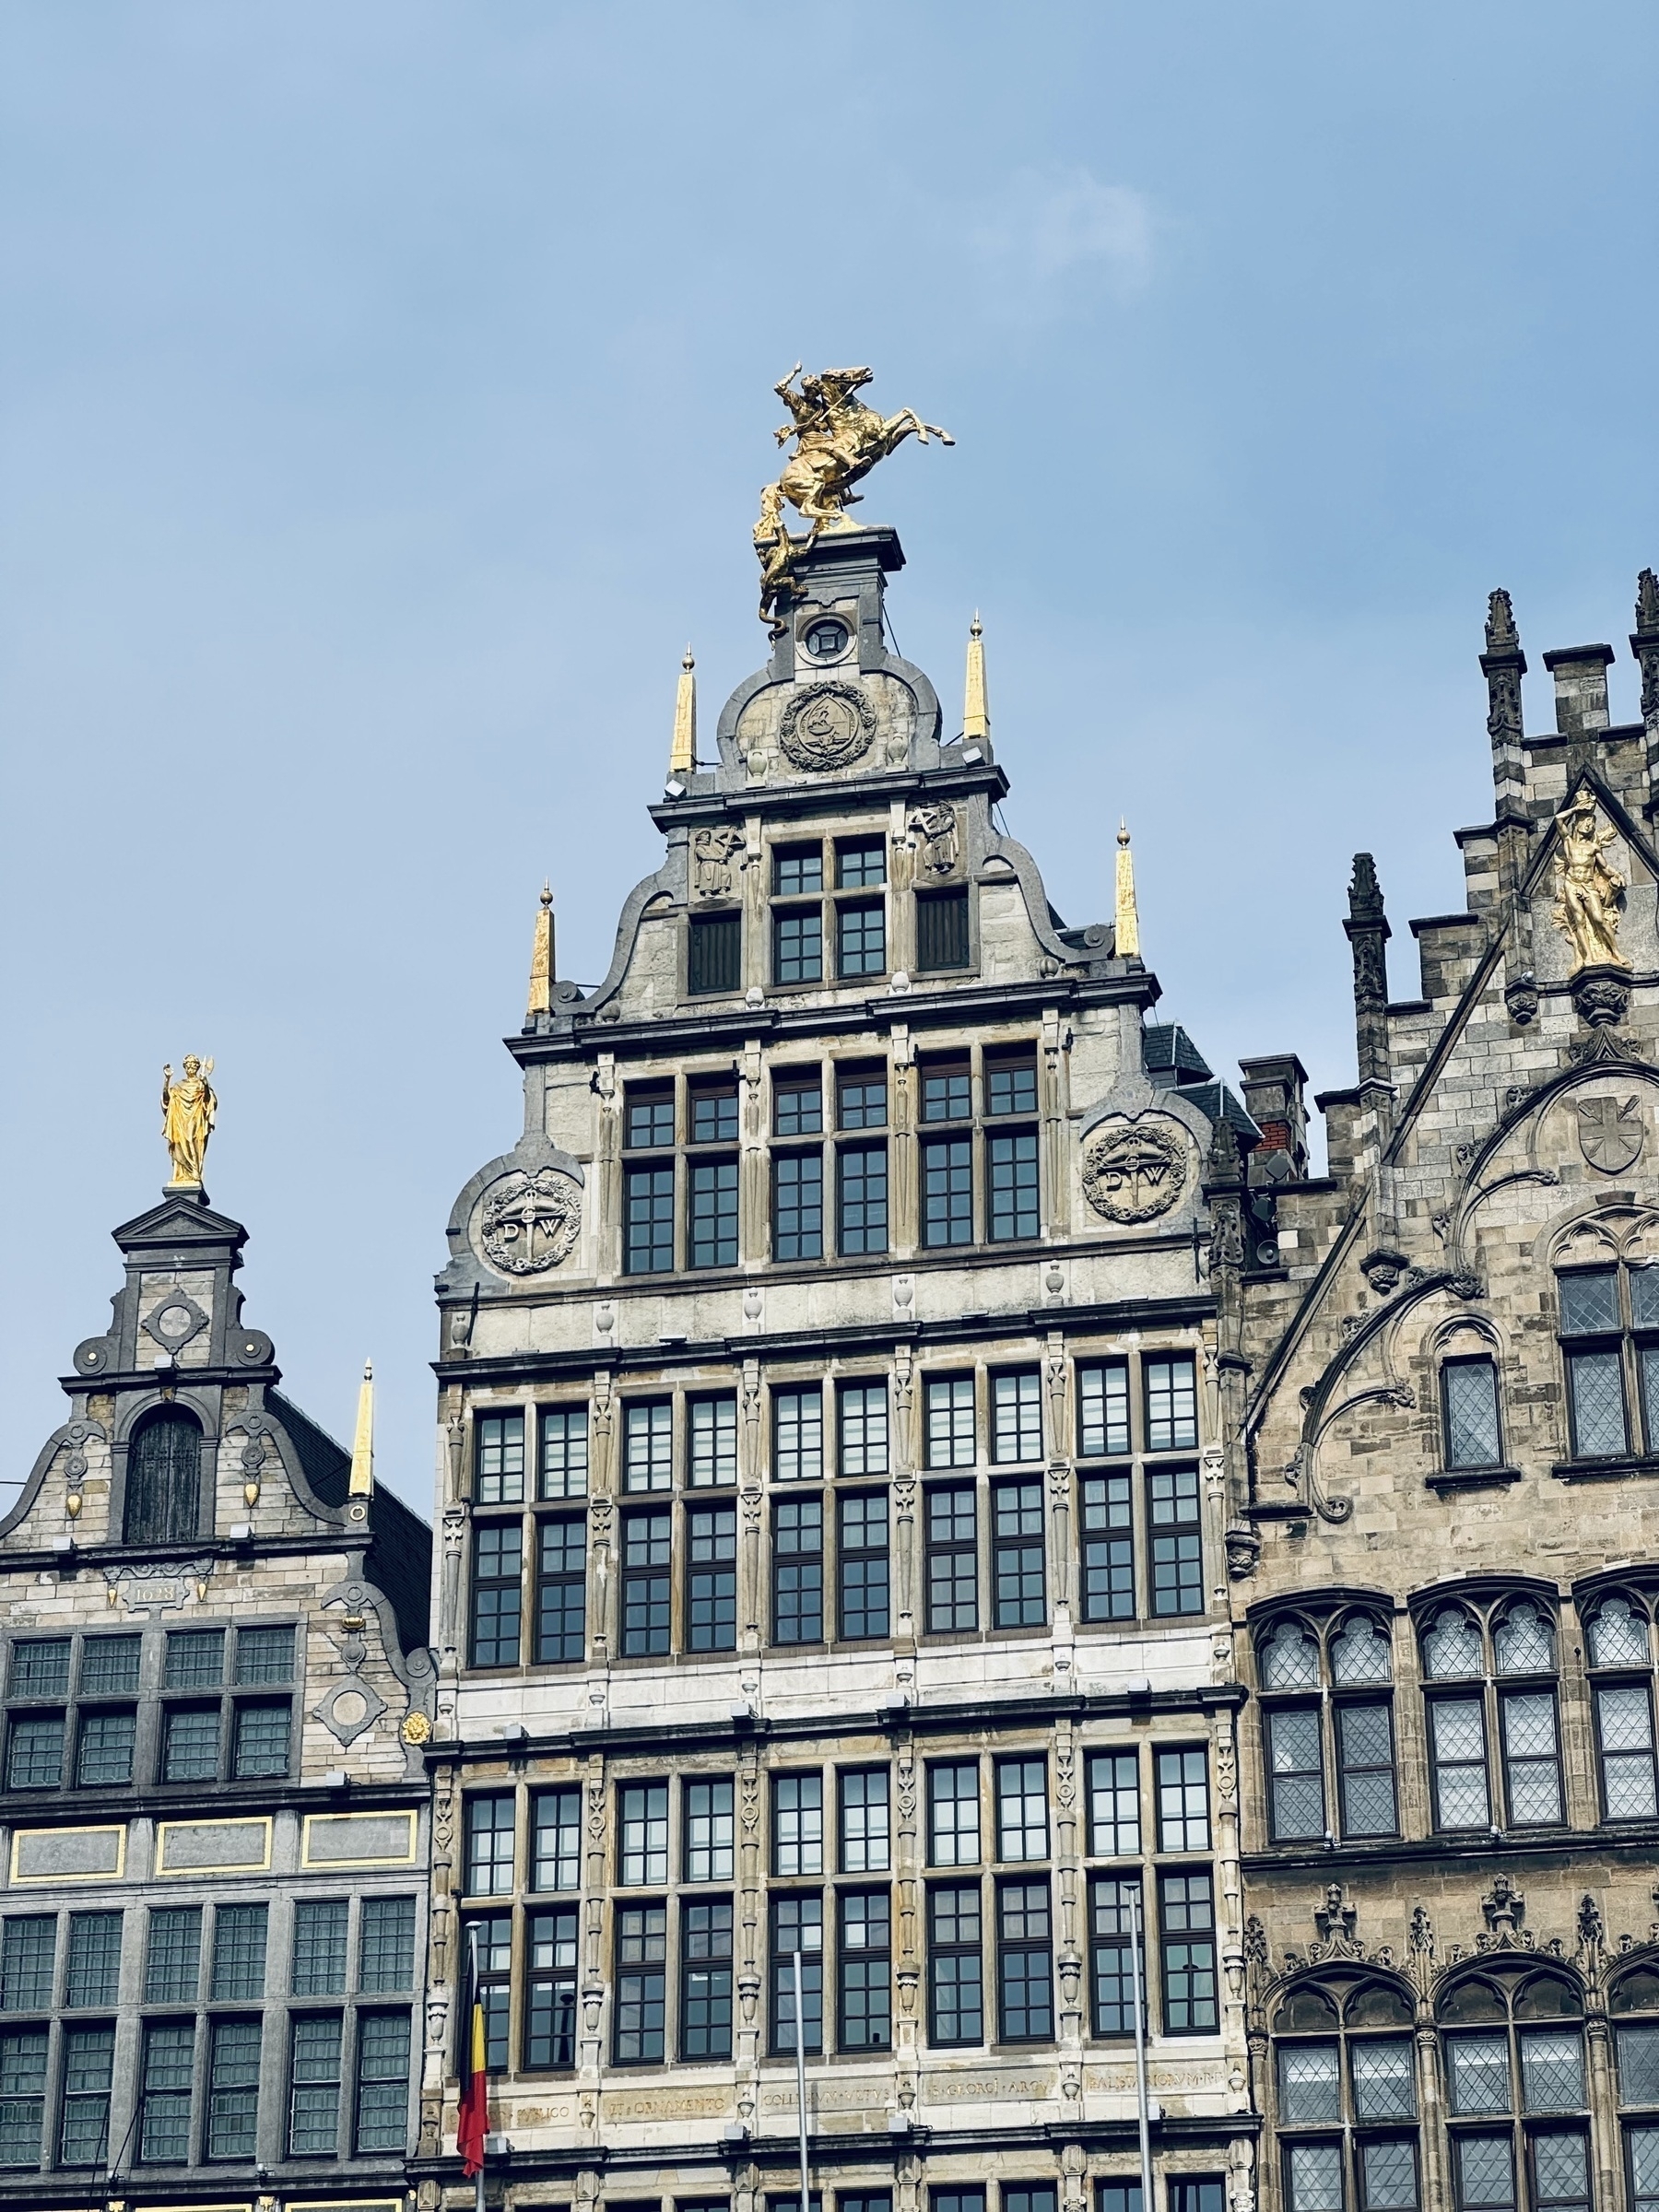 Shiny gold statues on the tops of buildings in the main square of Antwerp.